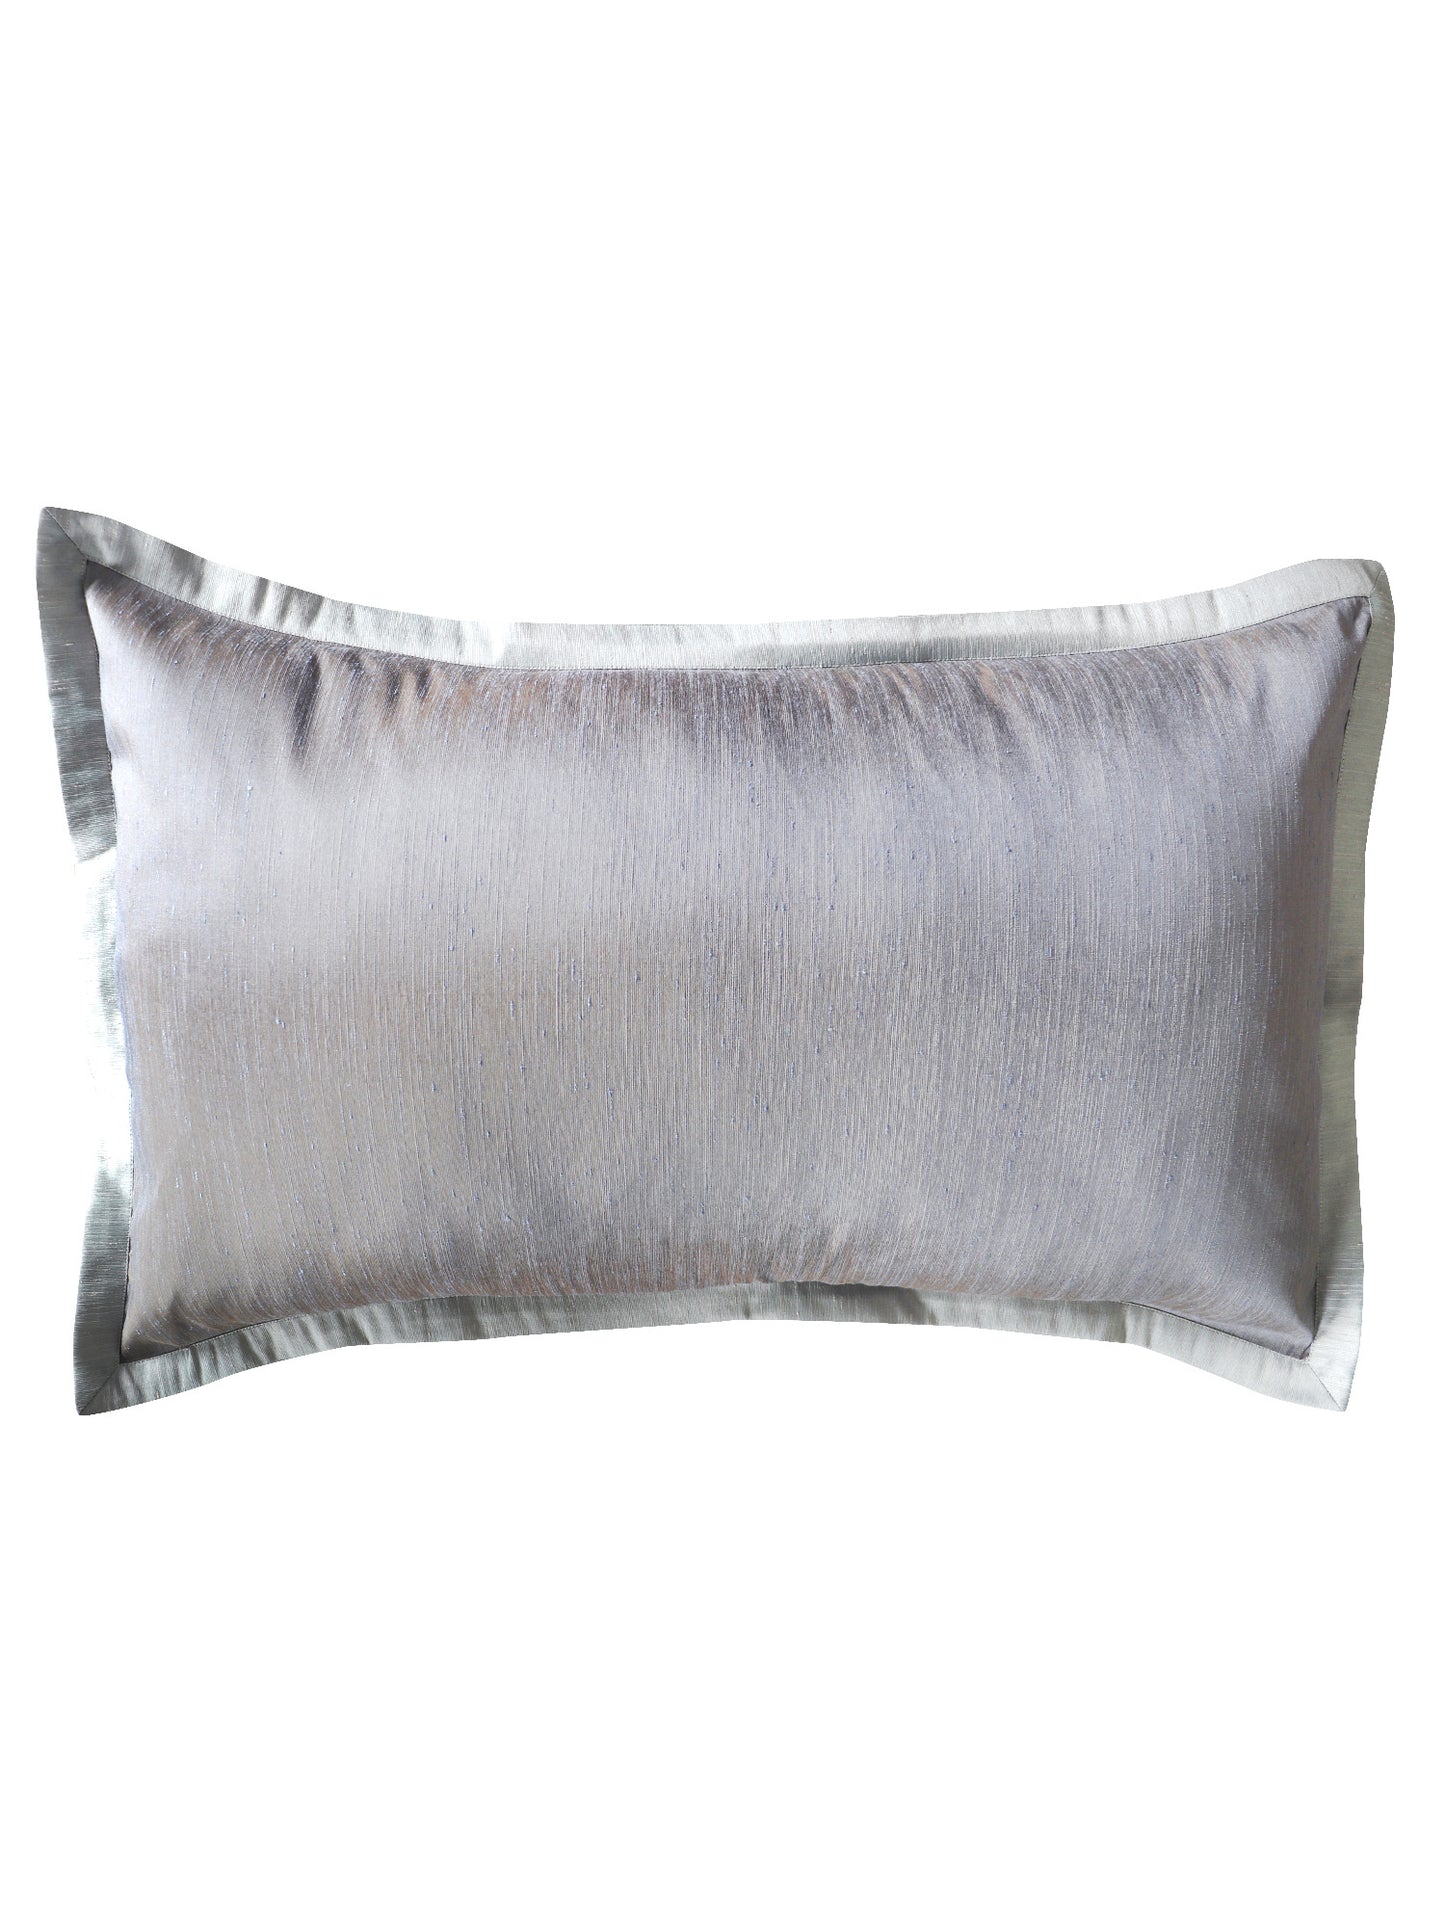 pillow cover for Grey colored bed quilt with 2 matching pillow covers made from polyester front and cotton backed quilt for king size double bed 